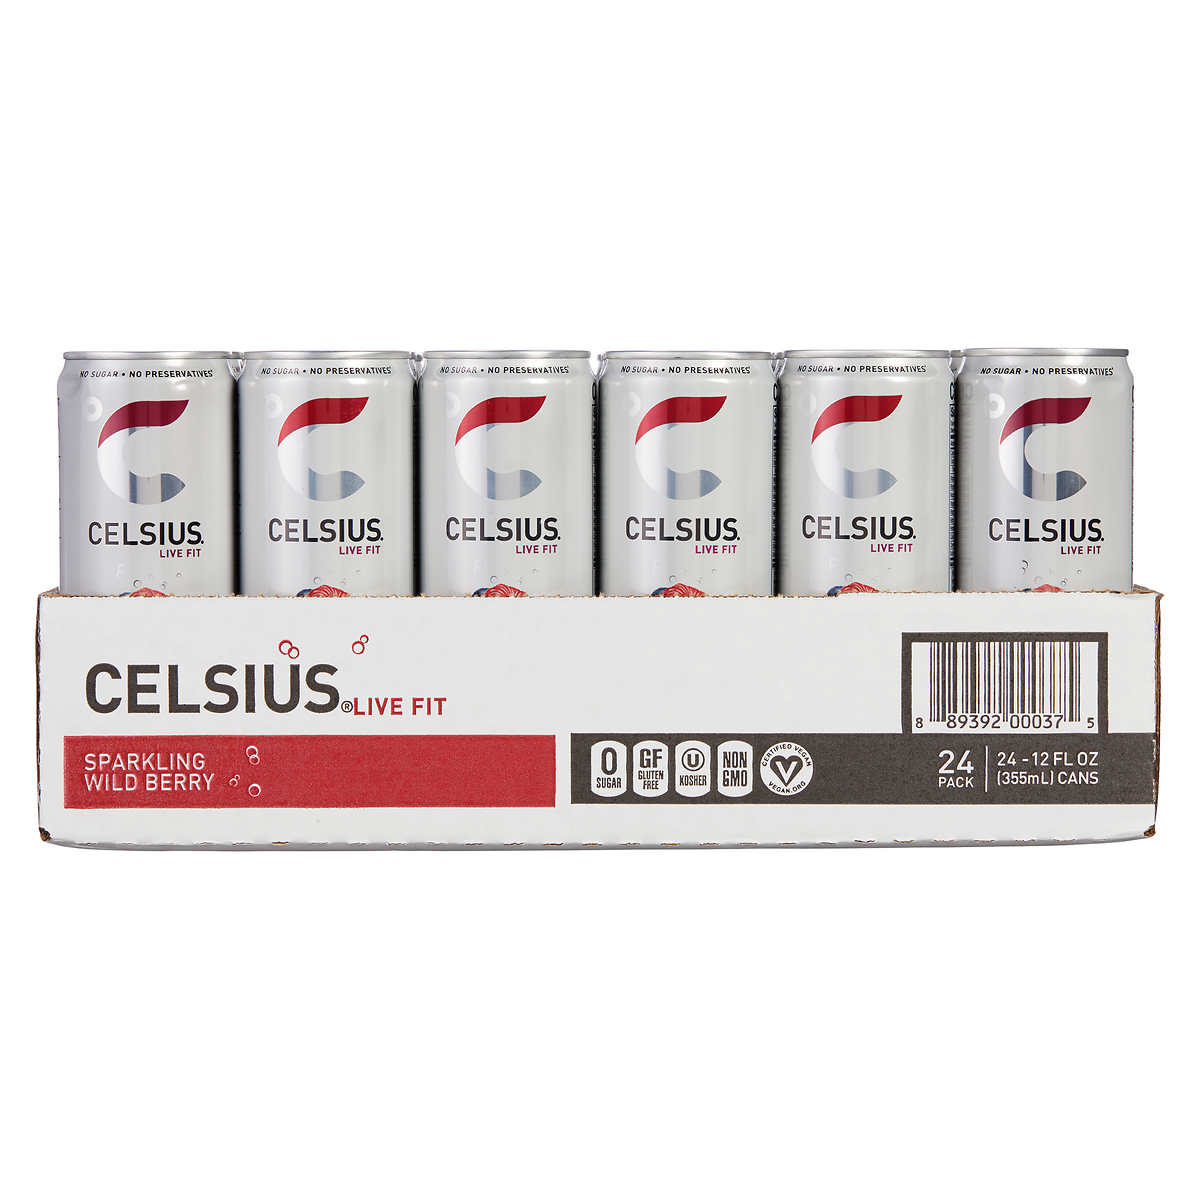 CELSIUS Sparkling Wild Berry, Functional Essential Energy Drink 12